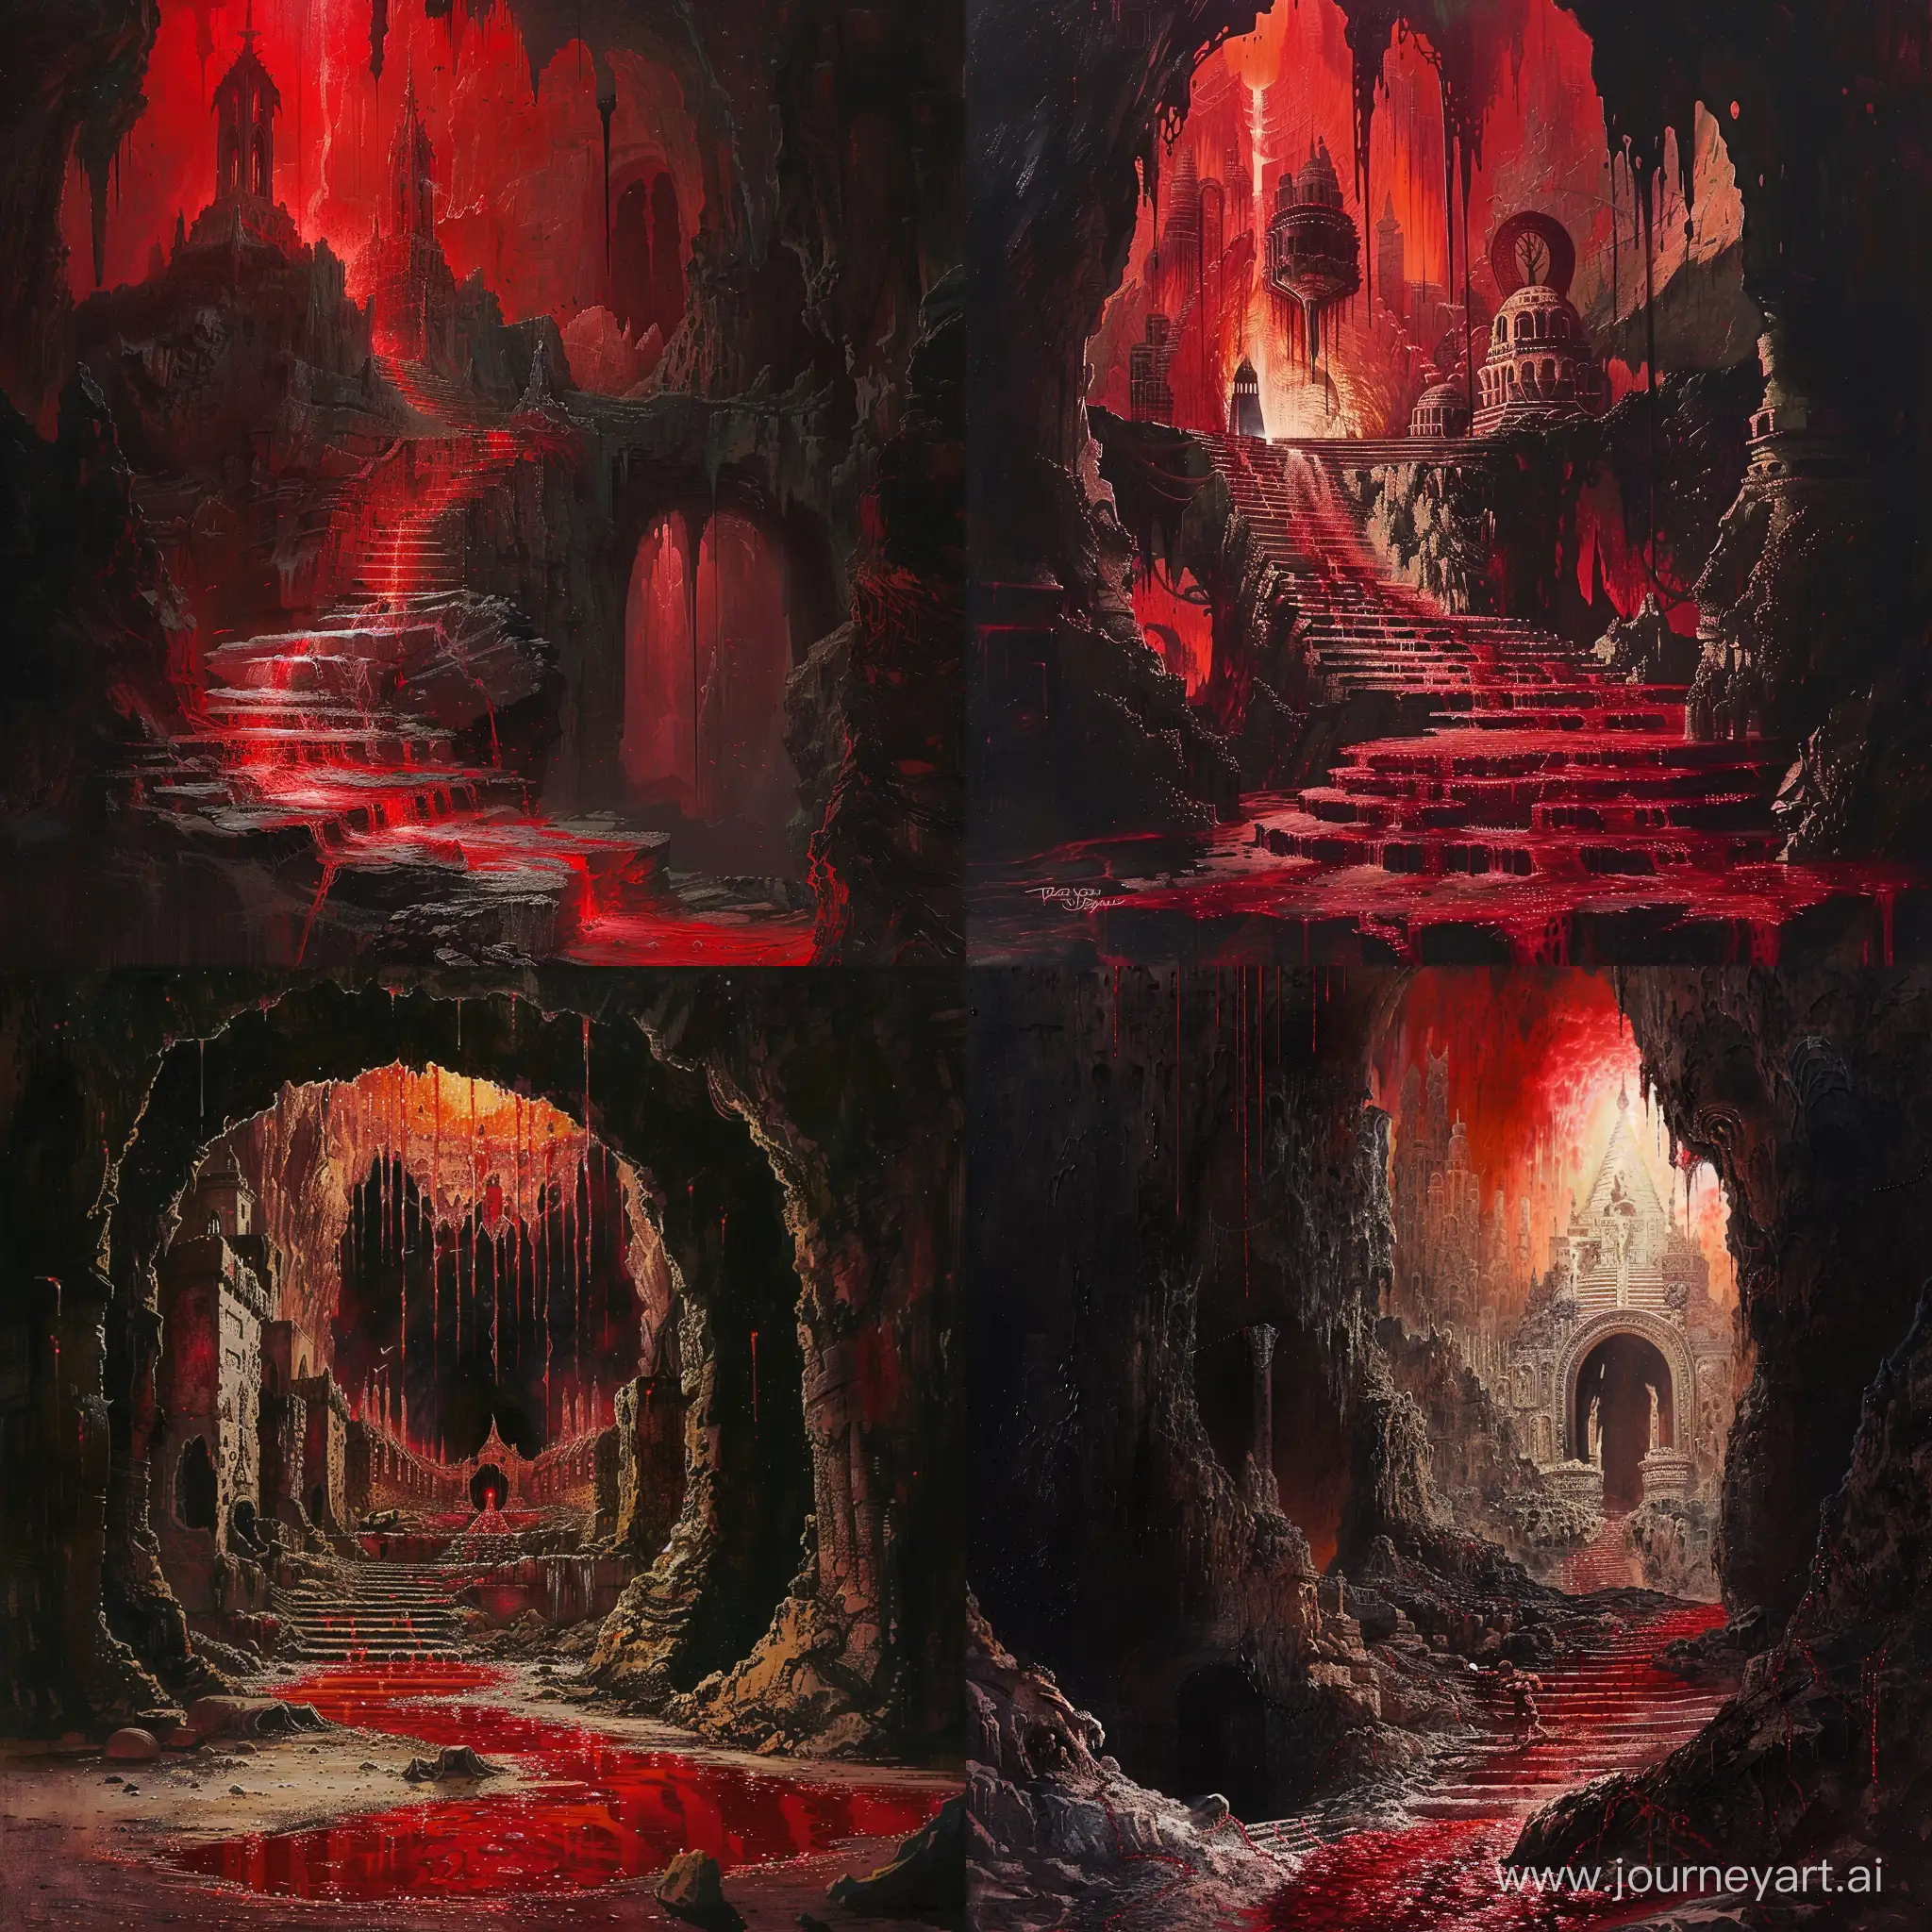 Visualize a ((spellbinding)) ((illustration)) that explores the mysterious depths of an ((ancient cavern, housing a sacred temple bathed in blood sacrifice and otherworldly light)), inspired by the dark visions of Gerald Brom and the surrealistic atmospheres of Miles Johnston. The canvas unfolds with Brom's Sacred Blood Red 